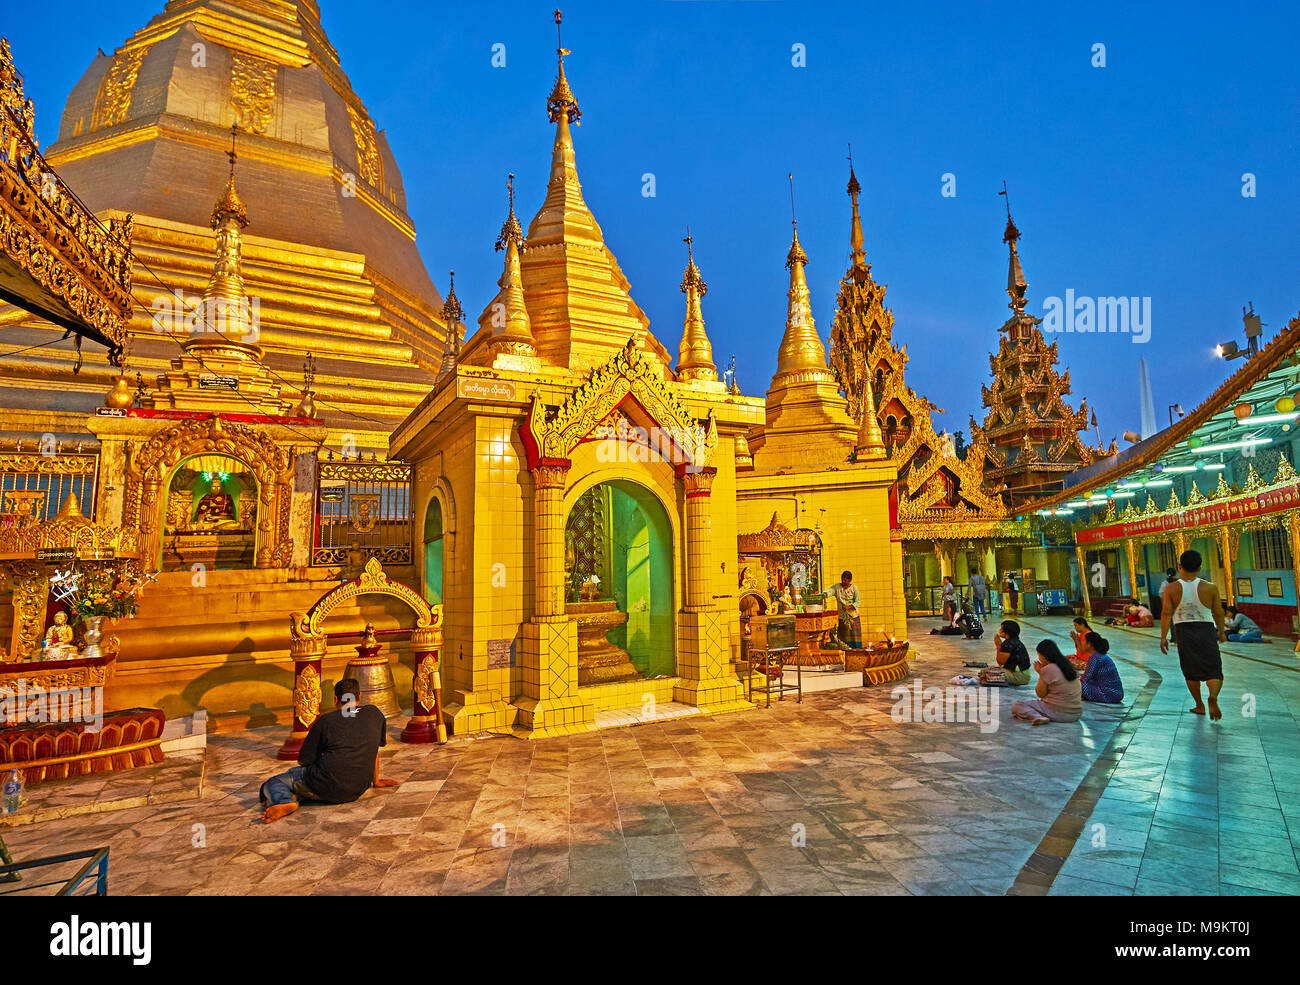 YANGON, MYANMAR - FEBRUARY 14, 2018: Sule Pagoda is famous as one of the holiest Buddhist sites in city and the outstanding architectural example of B Stock Photo